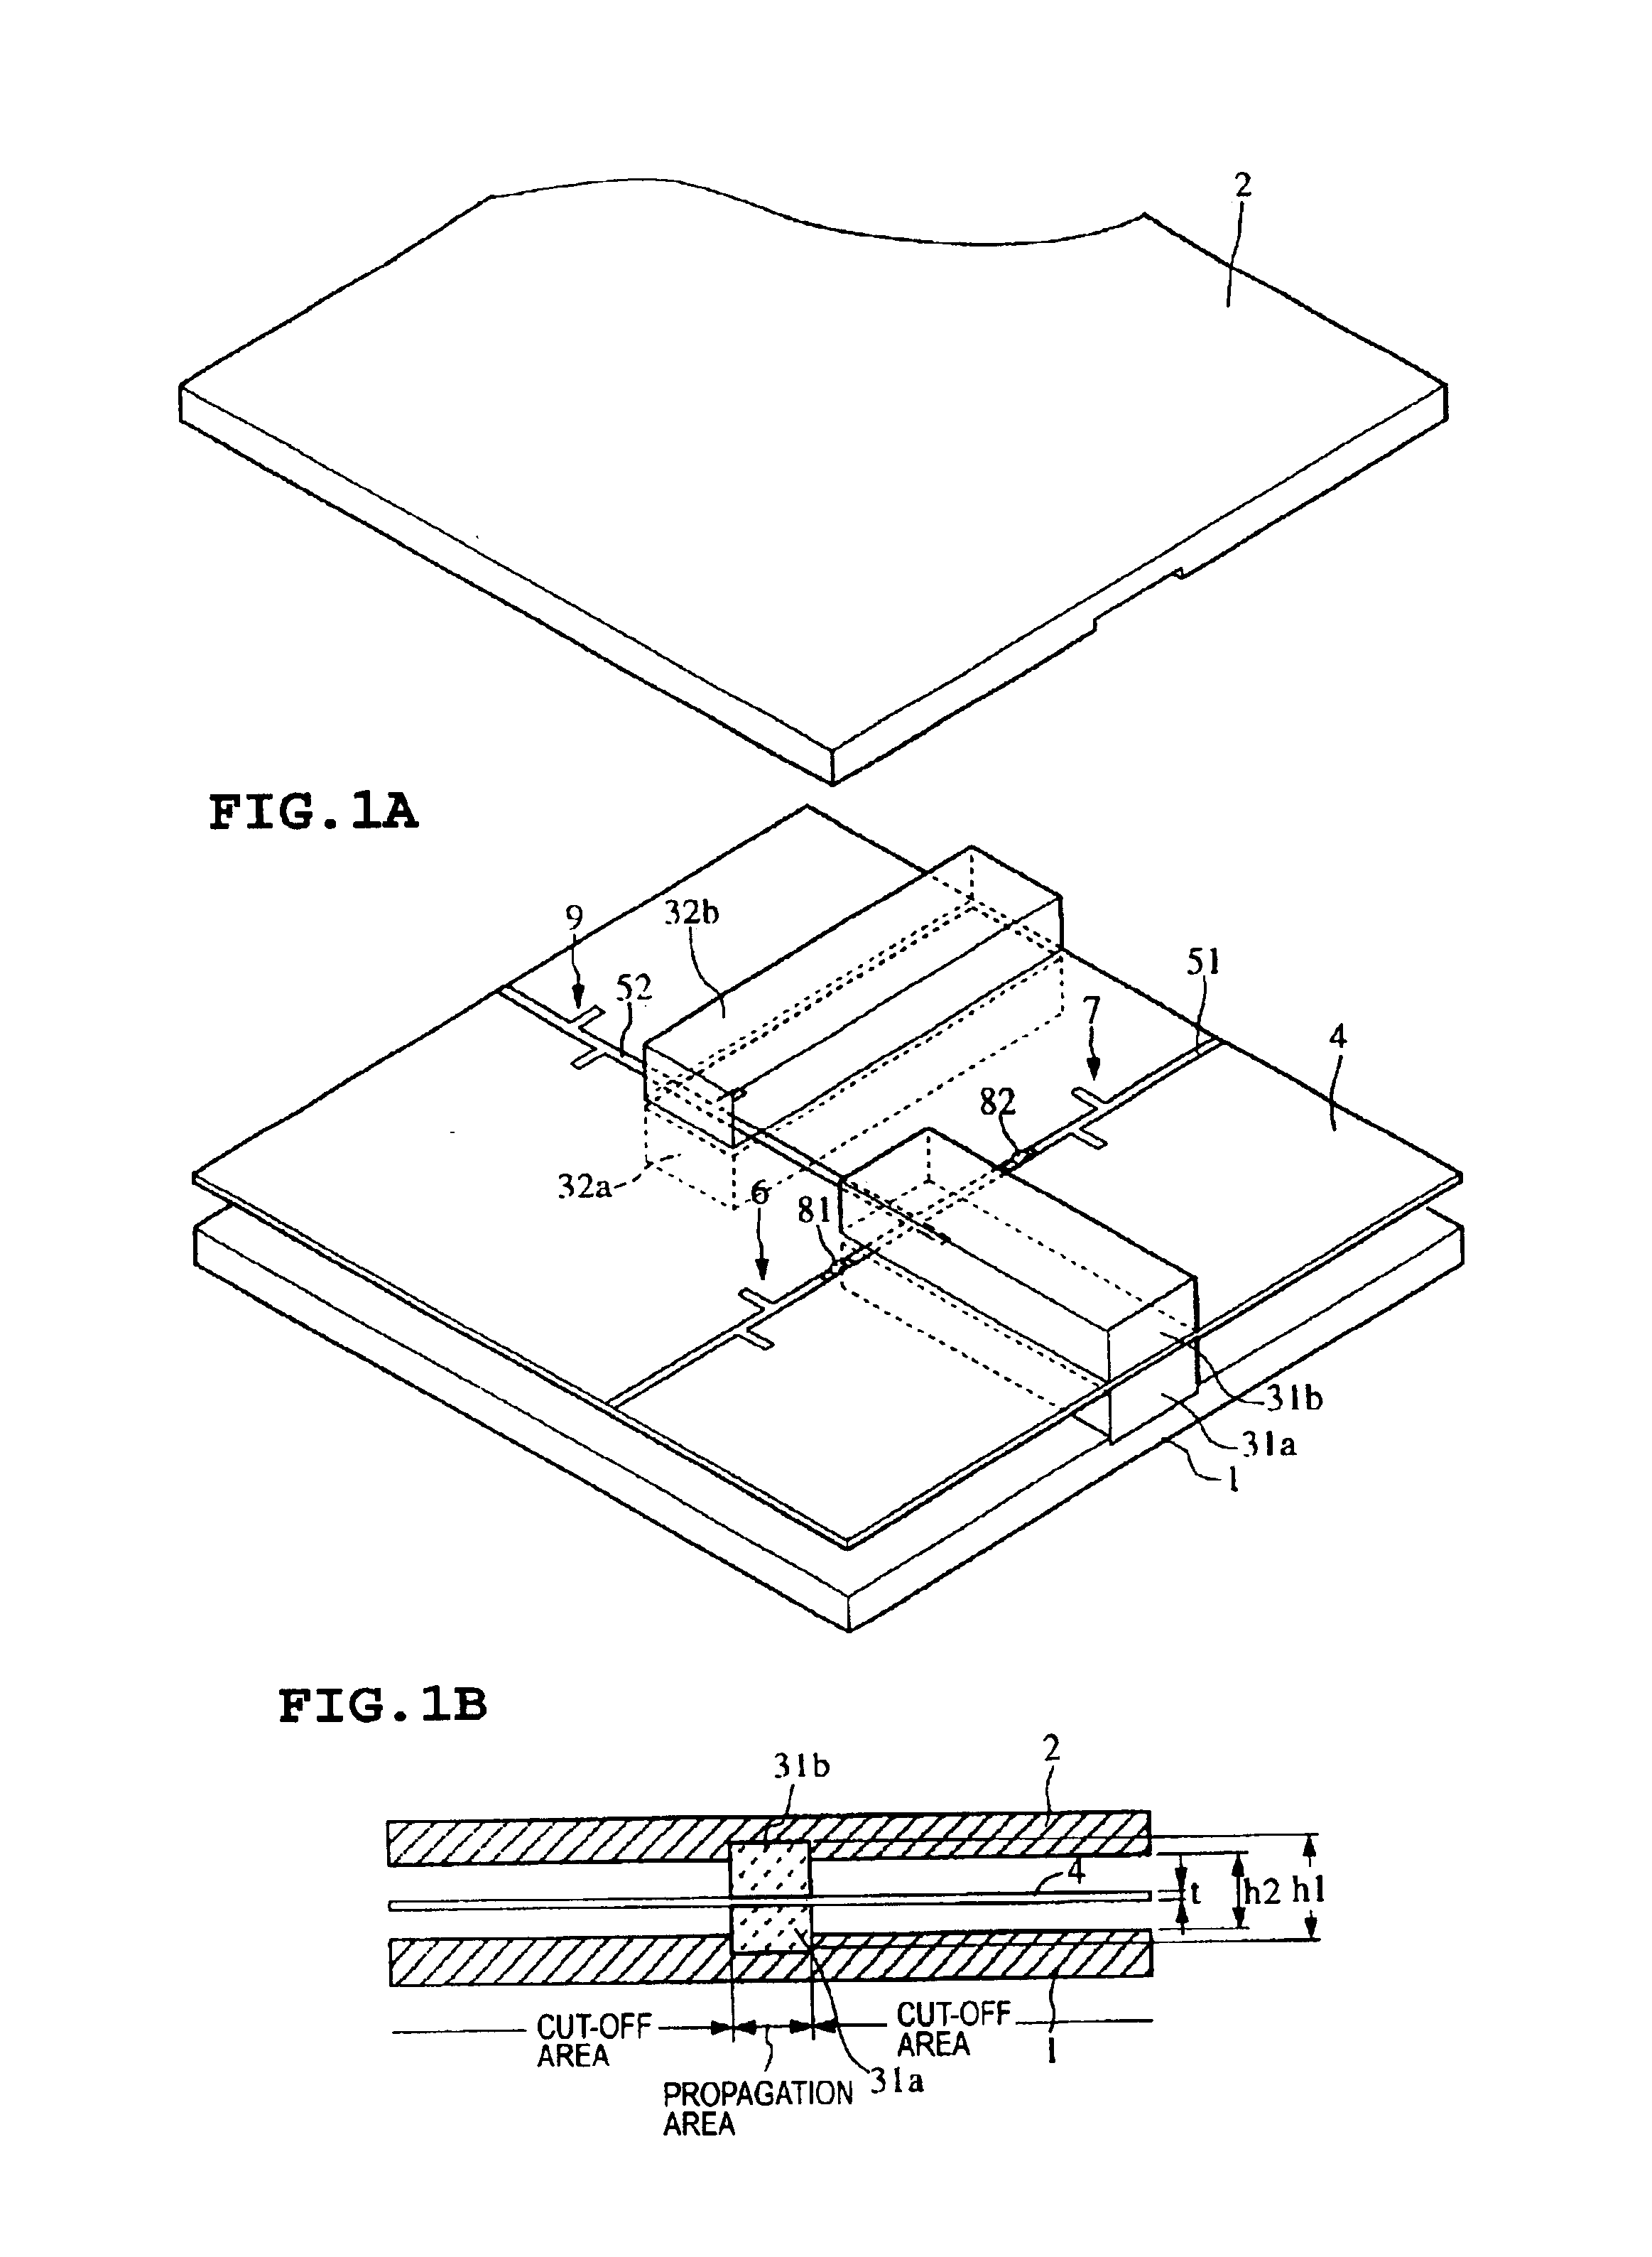 Line coupling structure, mixer, and receiving/transmitting apparatus comprised of suspended line and dielectric waveguide